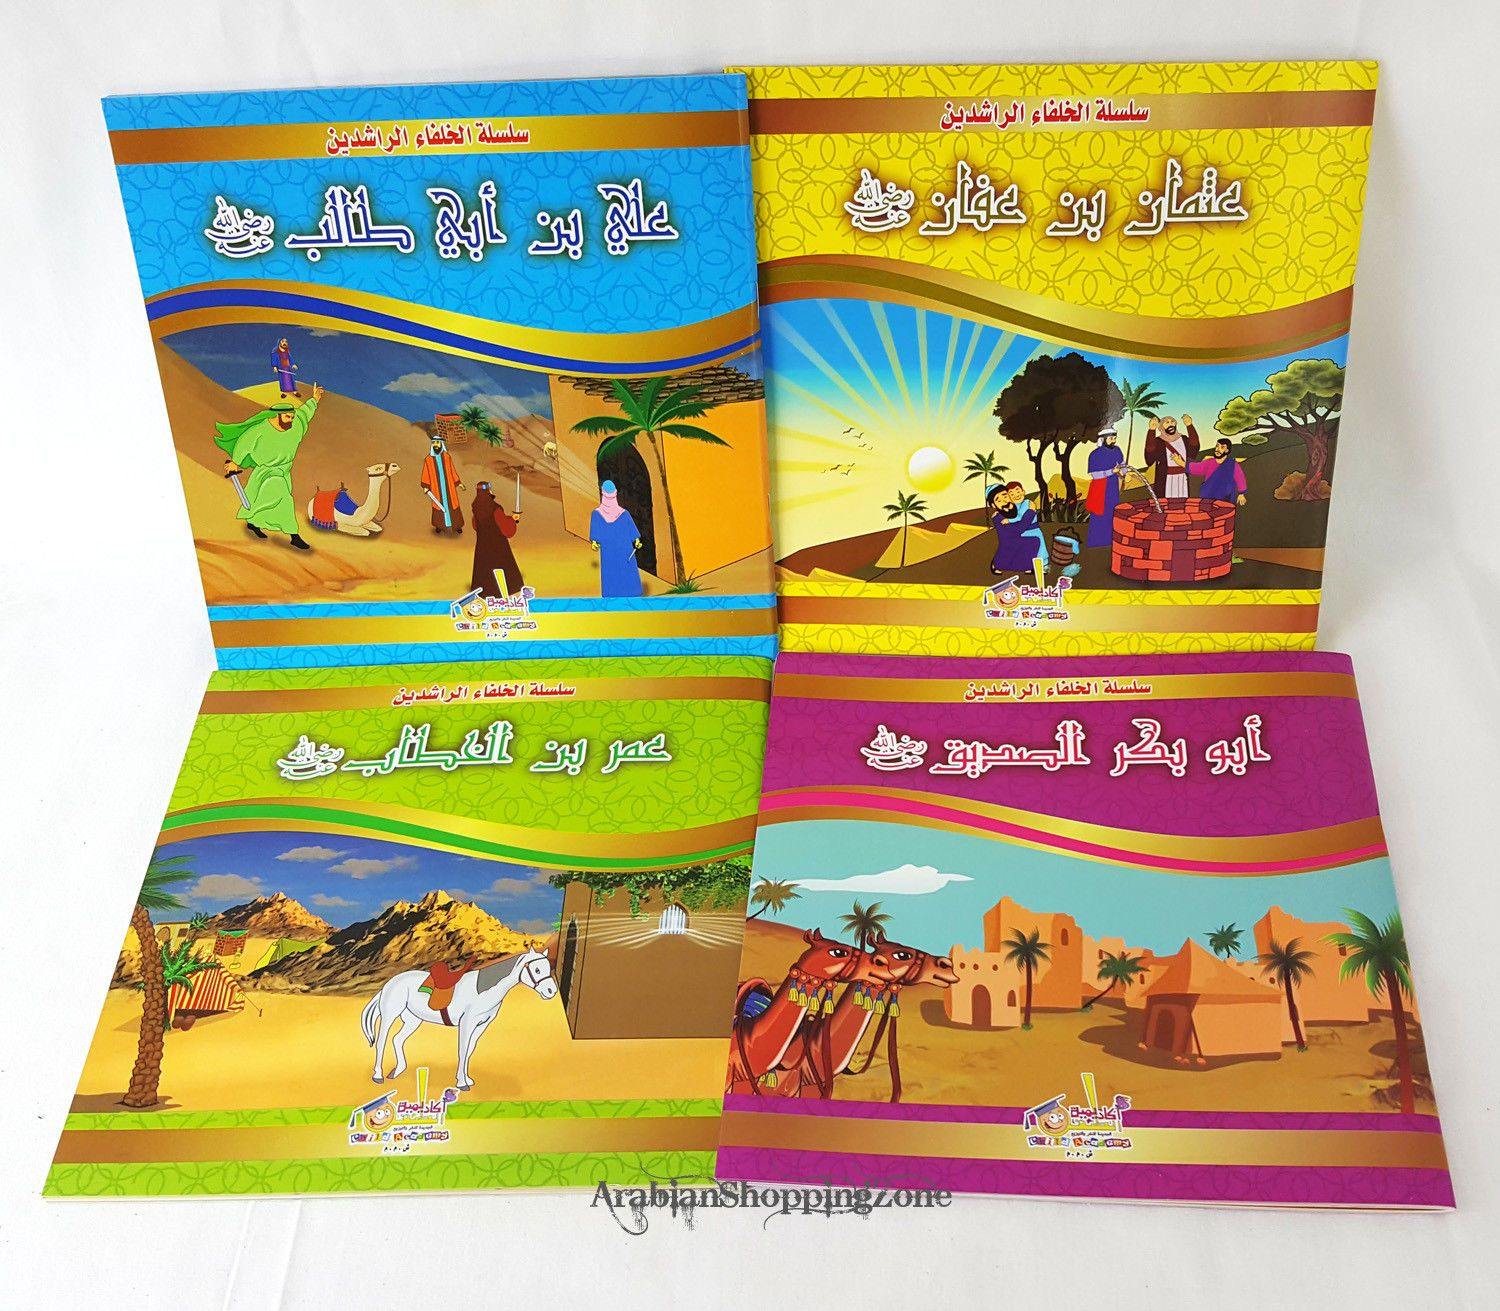 Collection of stories companions (Arabic) 4 books series - Arabian Shopping Zone